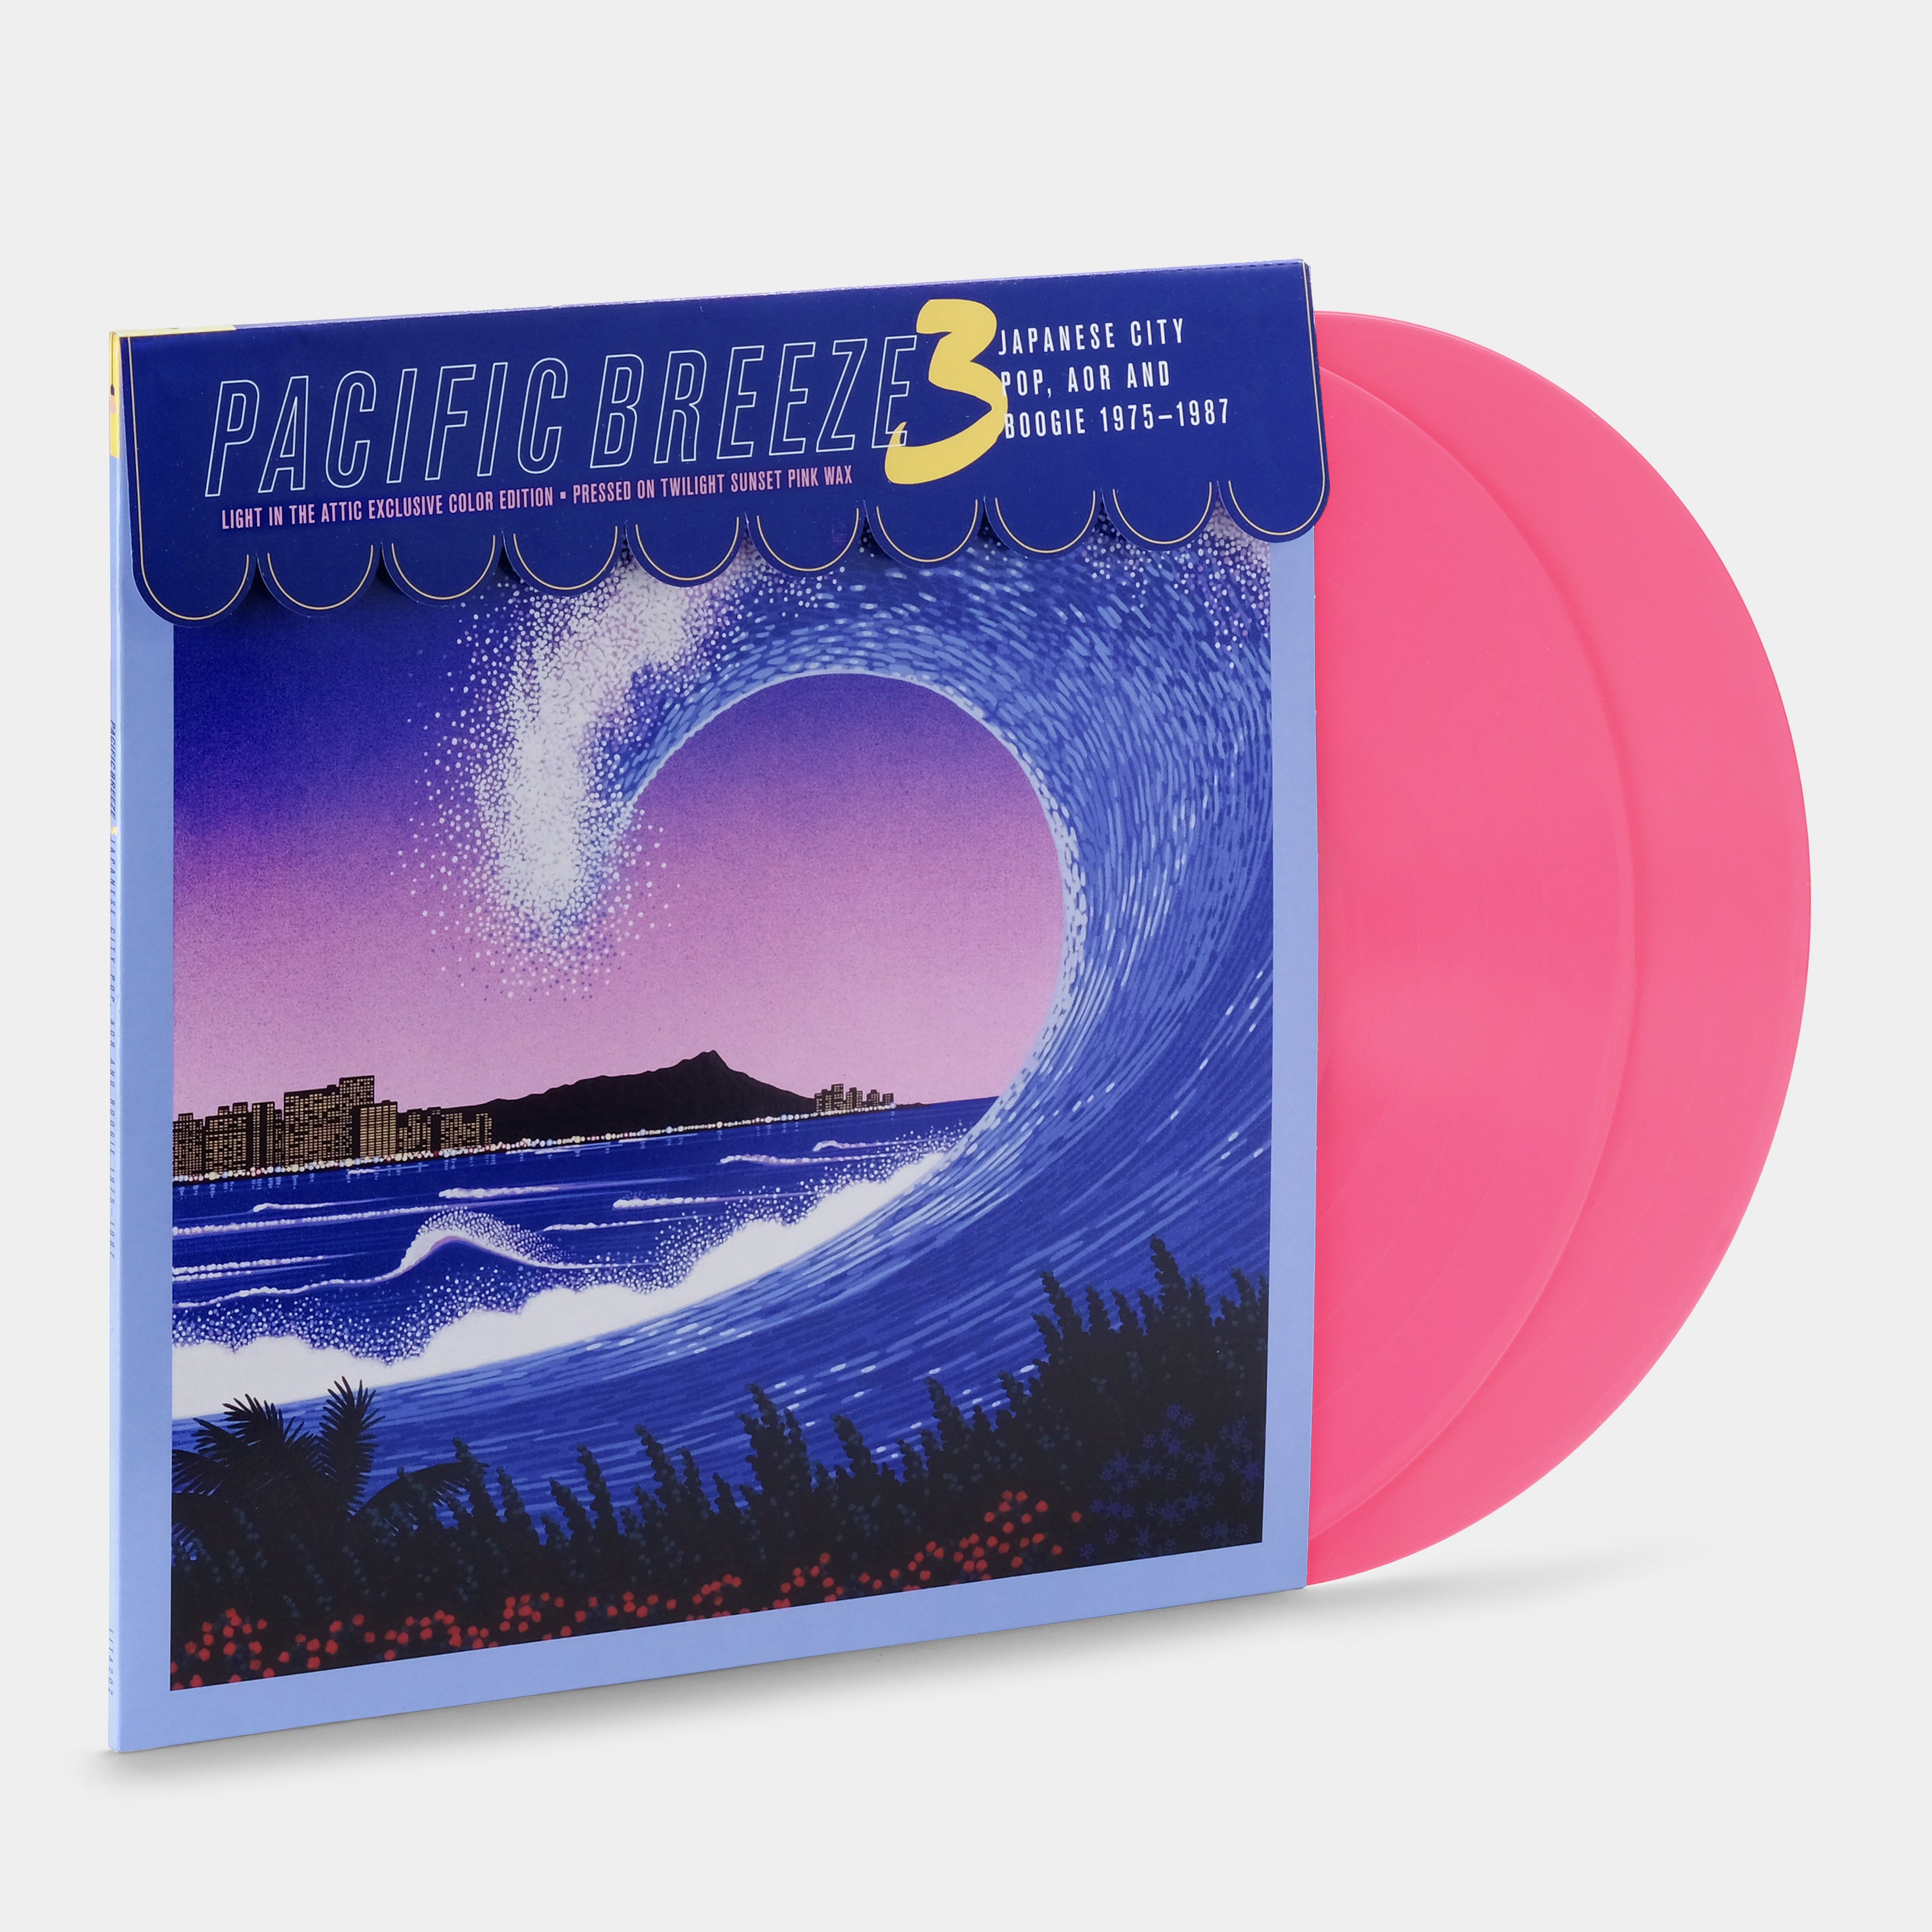 Pacific Breeze 3: Japanese City Pop, AOR And Boogie 1975-1987 2xLP Twilight Sunset Pink Vinyl Record